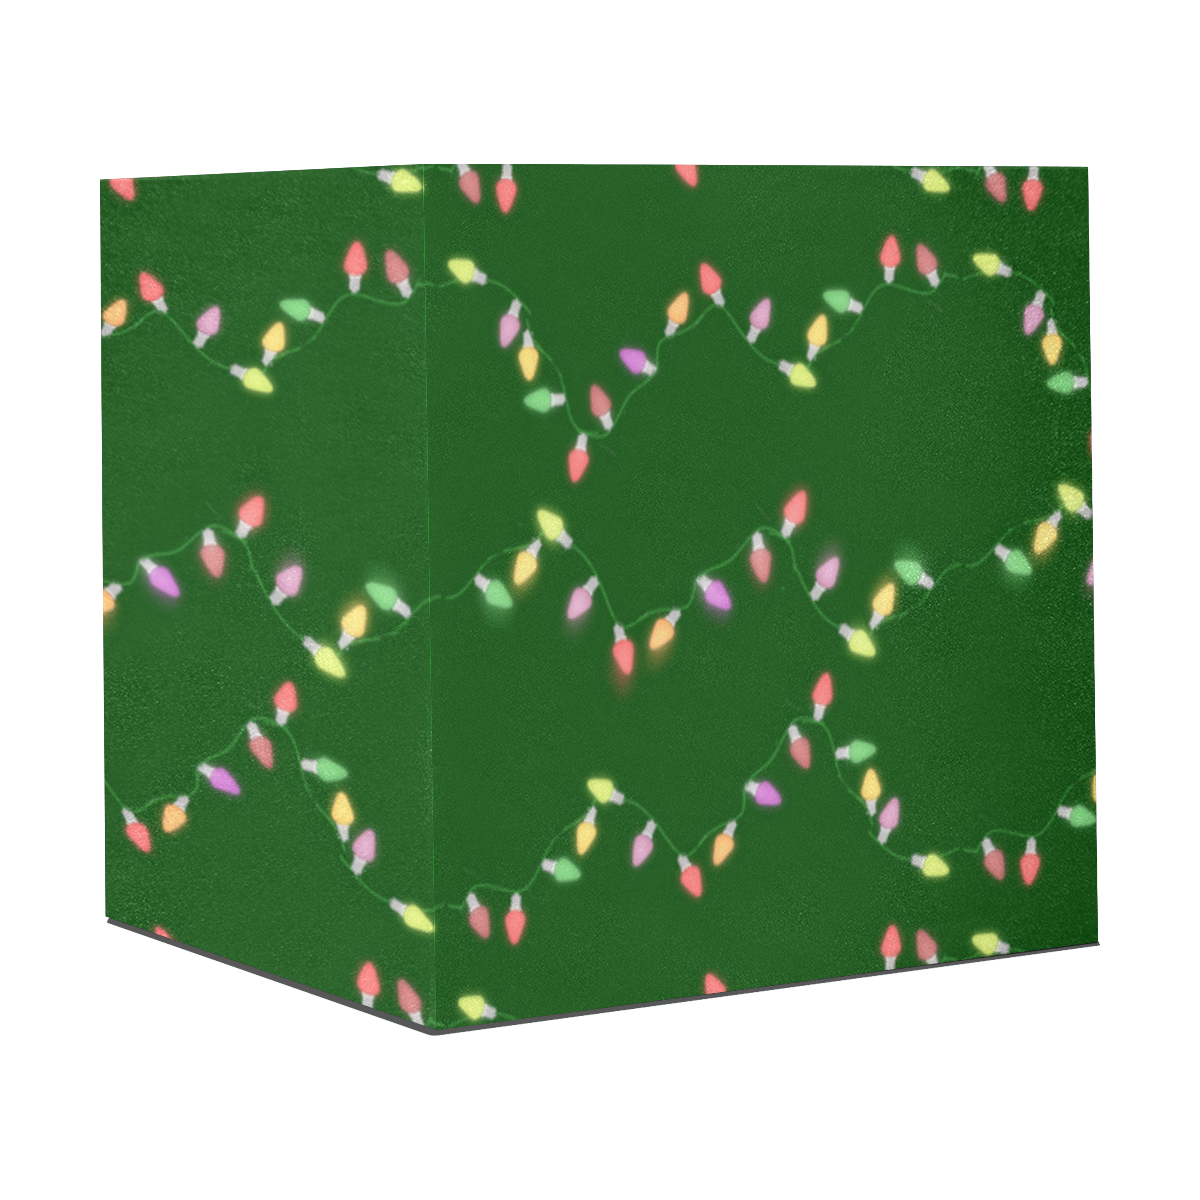 Festive Christmas Lights on Green Gift Wrapping Paper 58"x 23" (3 Rolls)